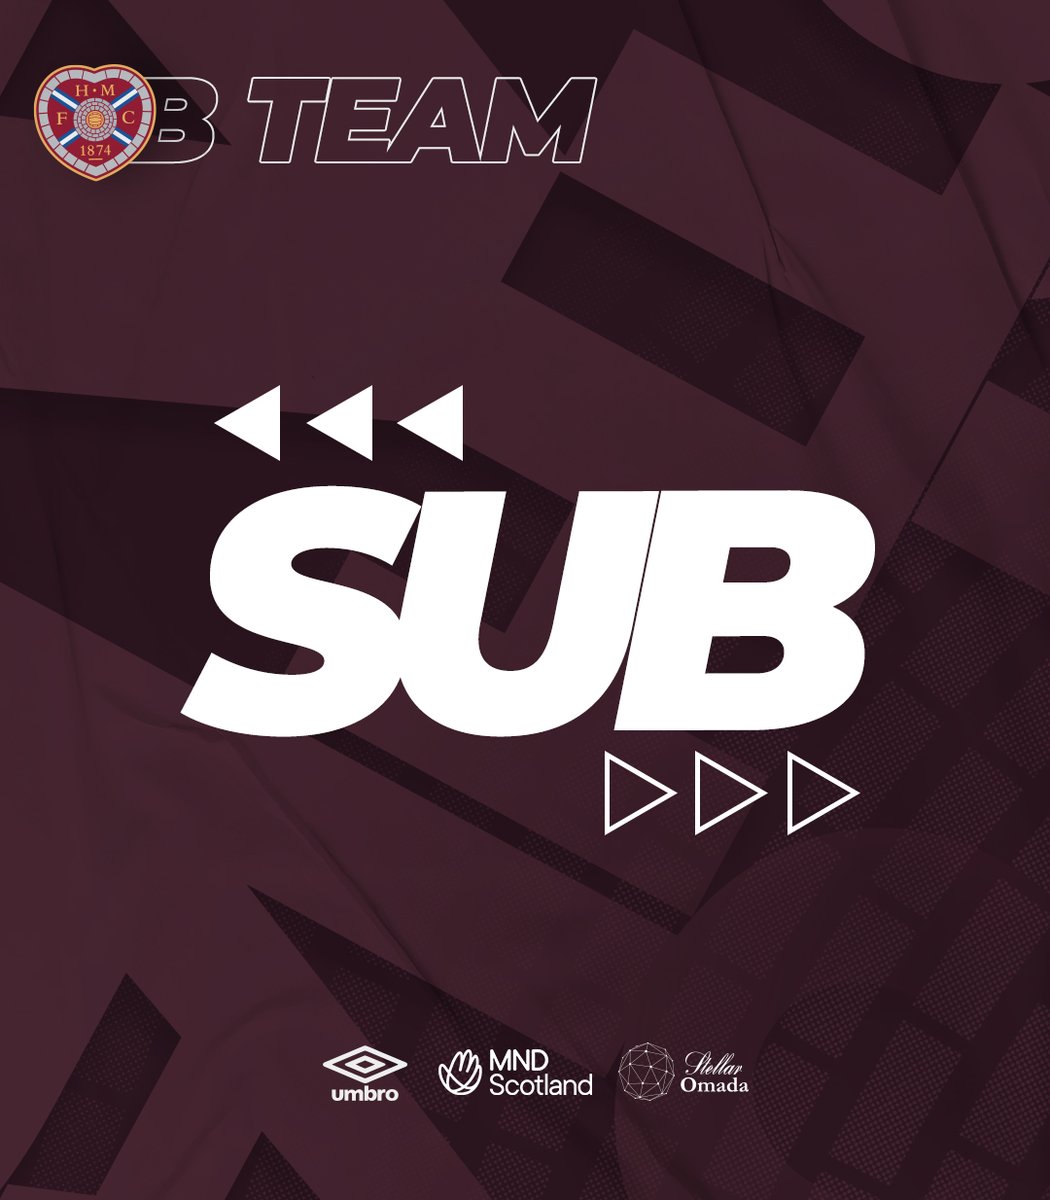 81' | HMFC 4-1 BUFC A change for the Jambos 🔄 ⬅️ Mackenzie Ross ➡️ Murray Thomas